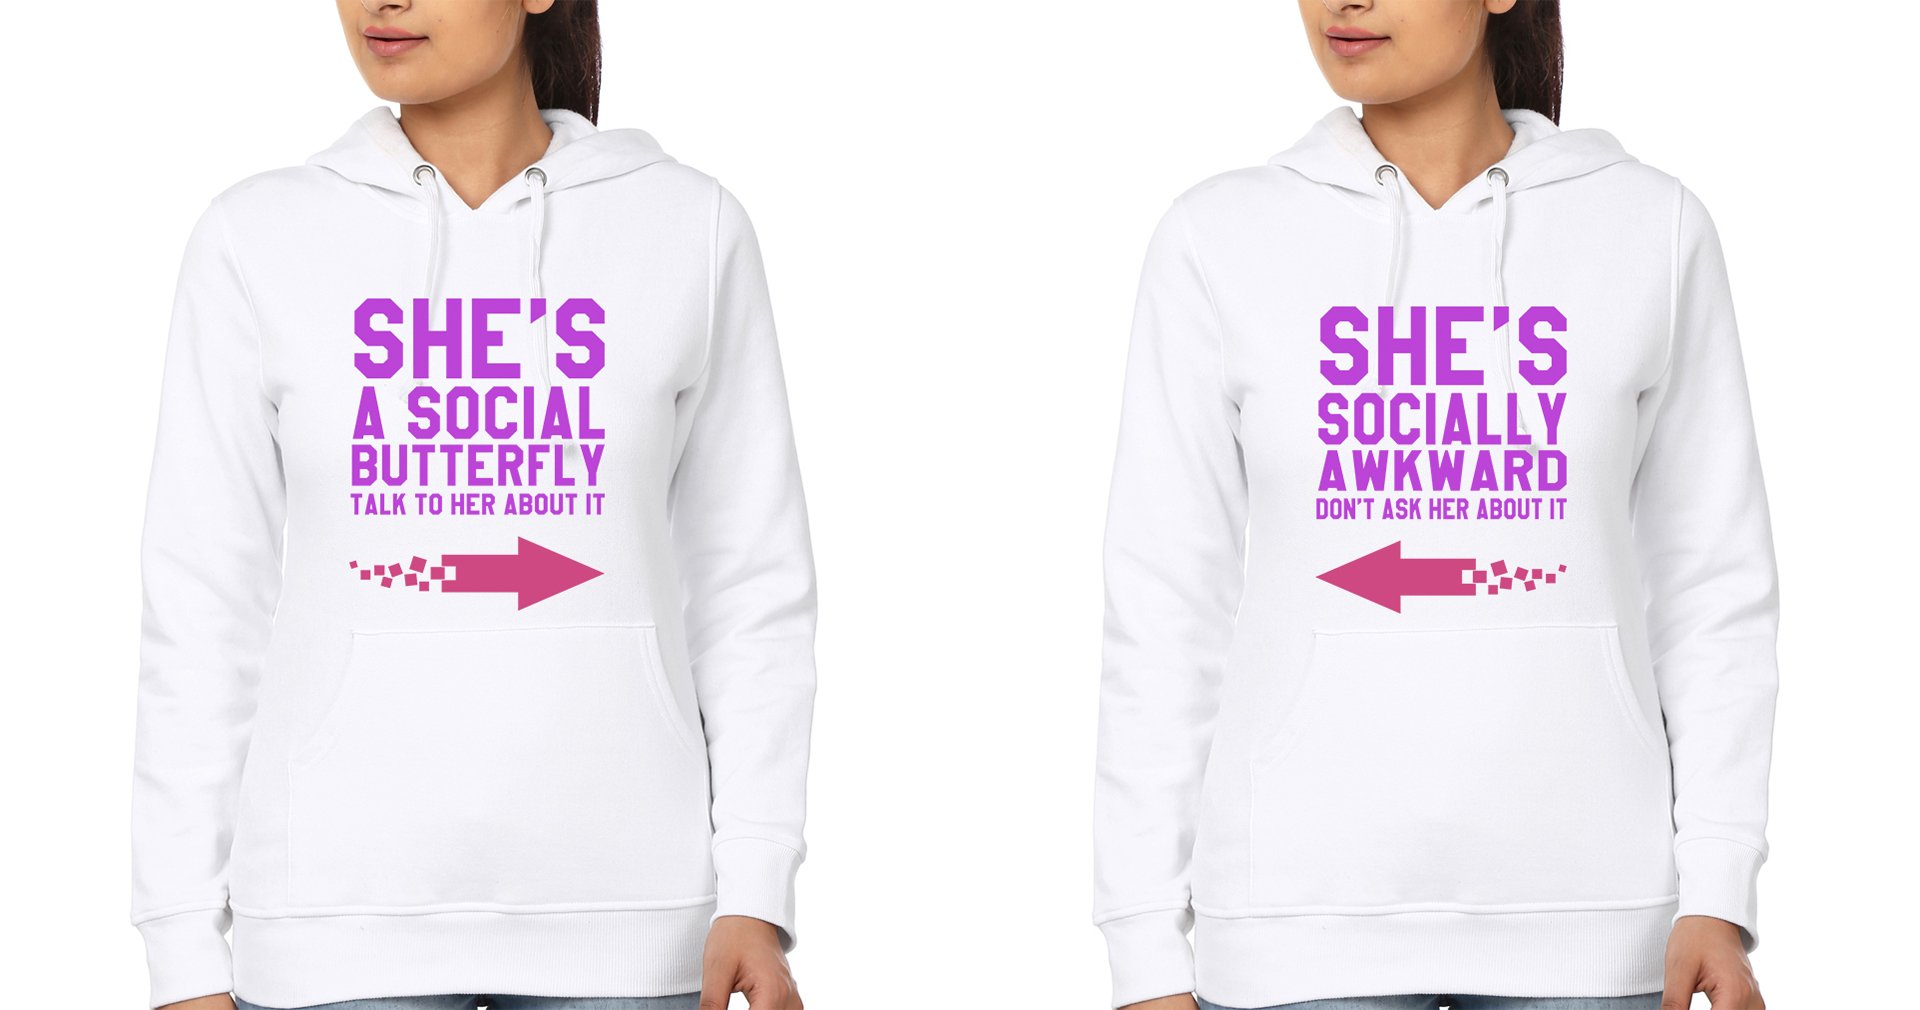 Social Butterfly social awkward BFF Hoodies-FunkyTradition